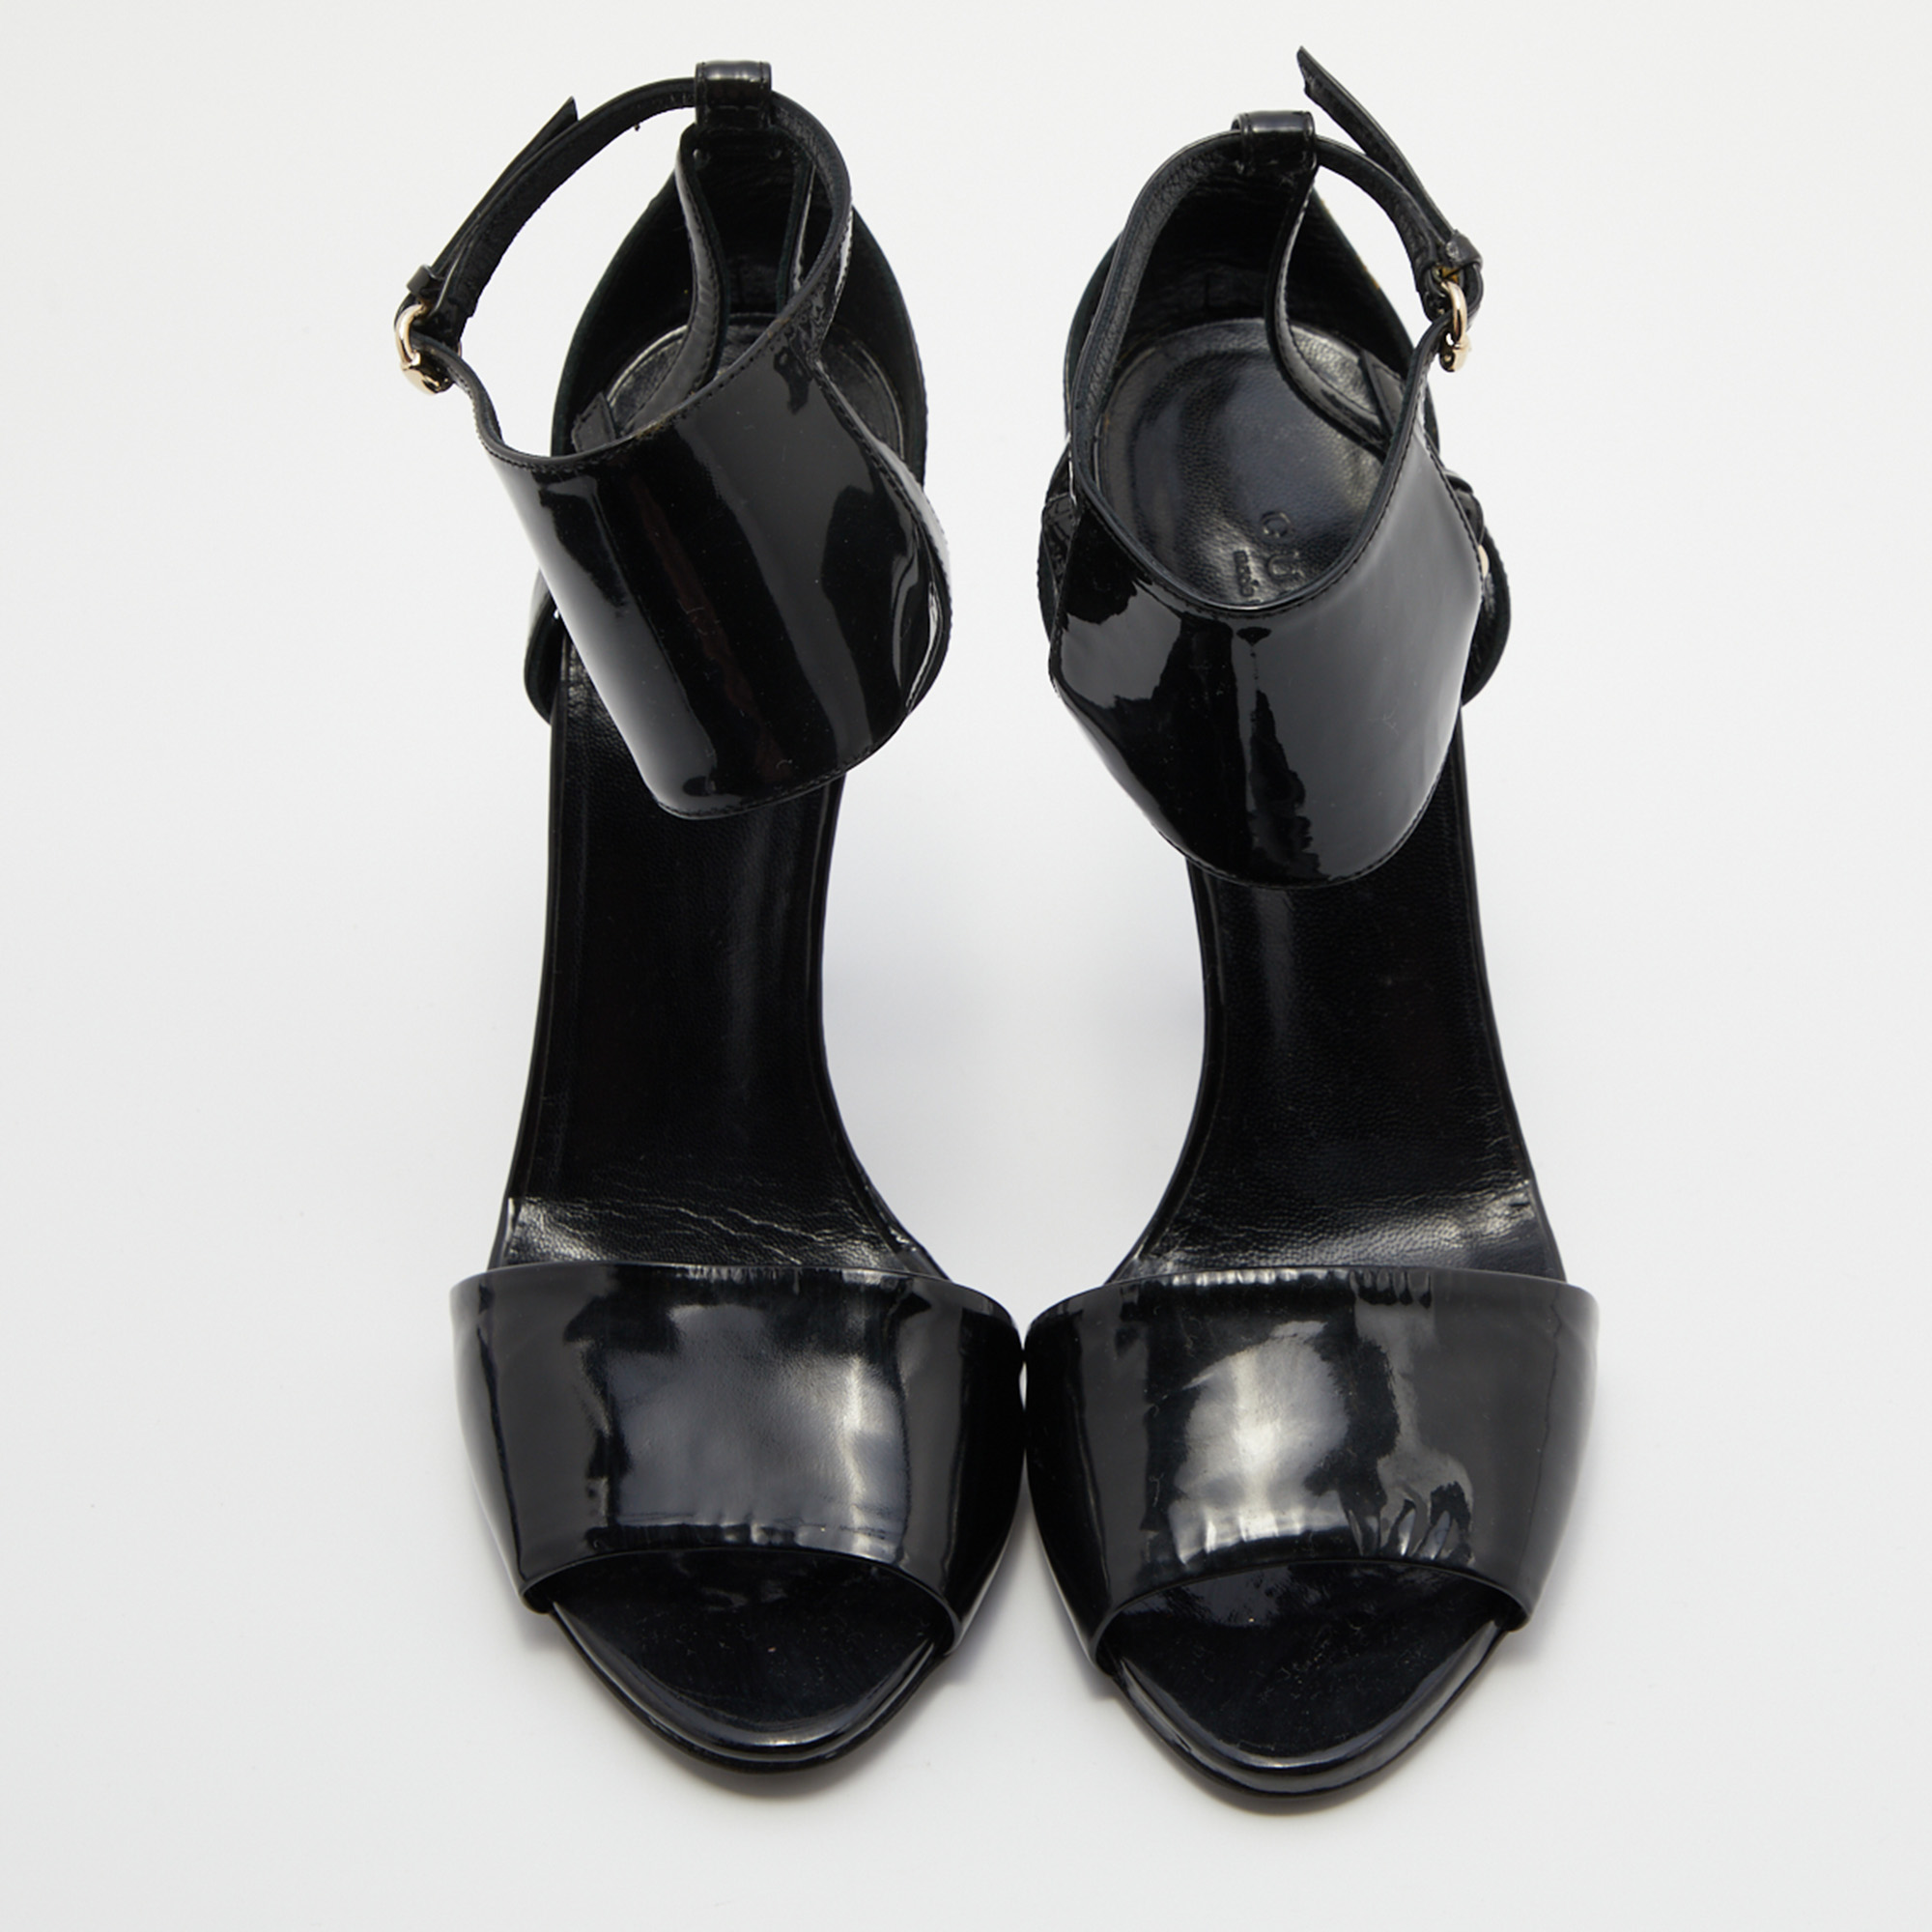 Gucci Black Patent Leather Open Toe Ankle Strap Sandals Size 38.5